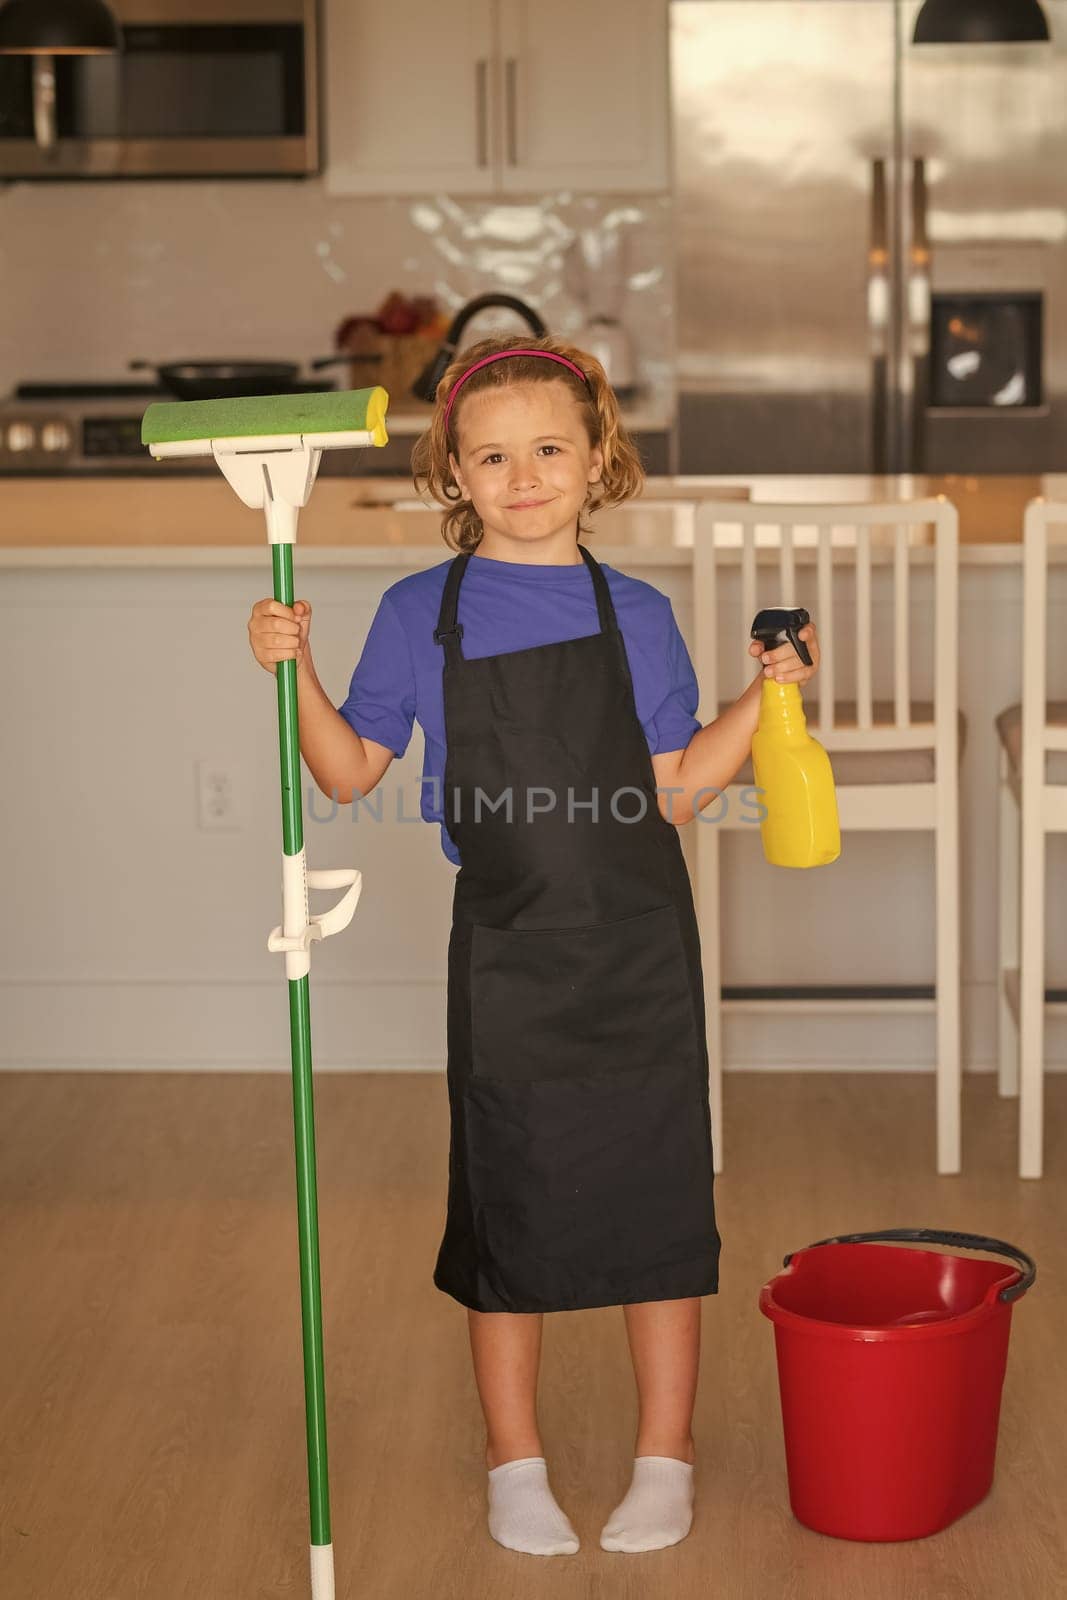 Child use duster and gloves for cleaning. Funny child mopping house. Cleaning accessory, cleaning supplies. Housekeeping and home cleaning